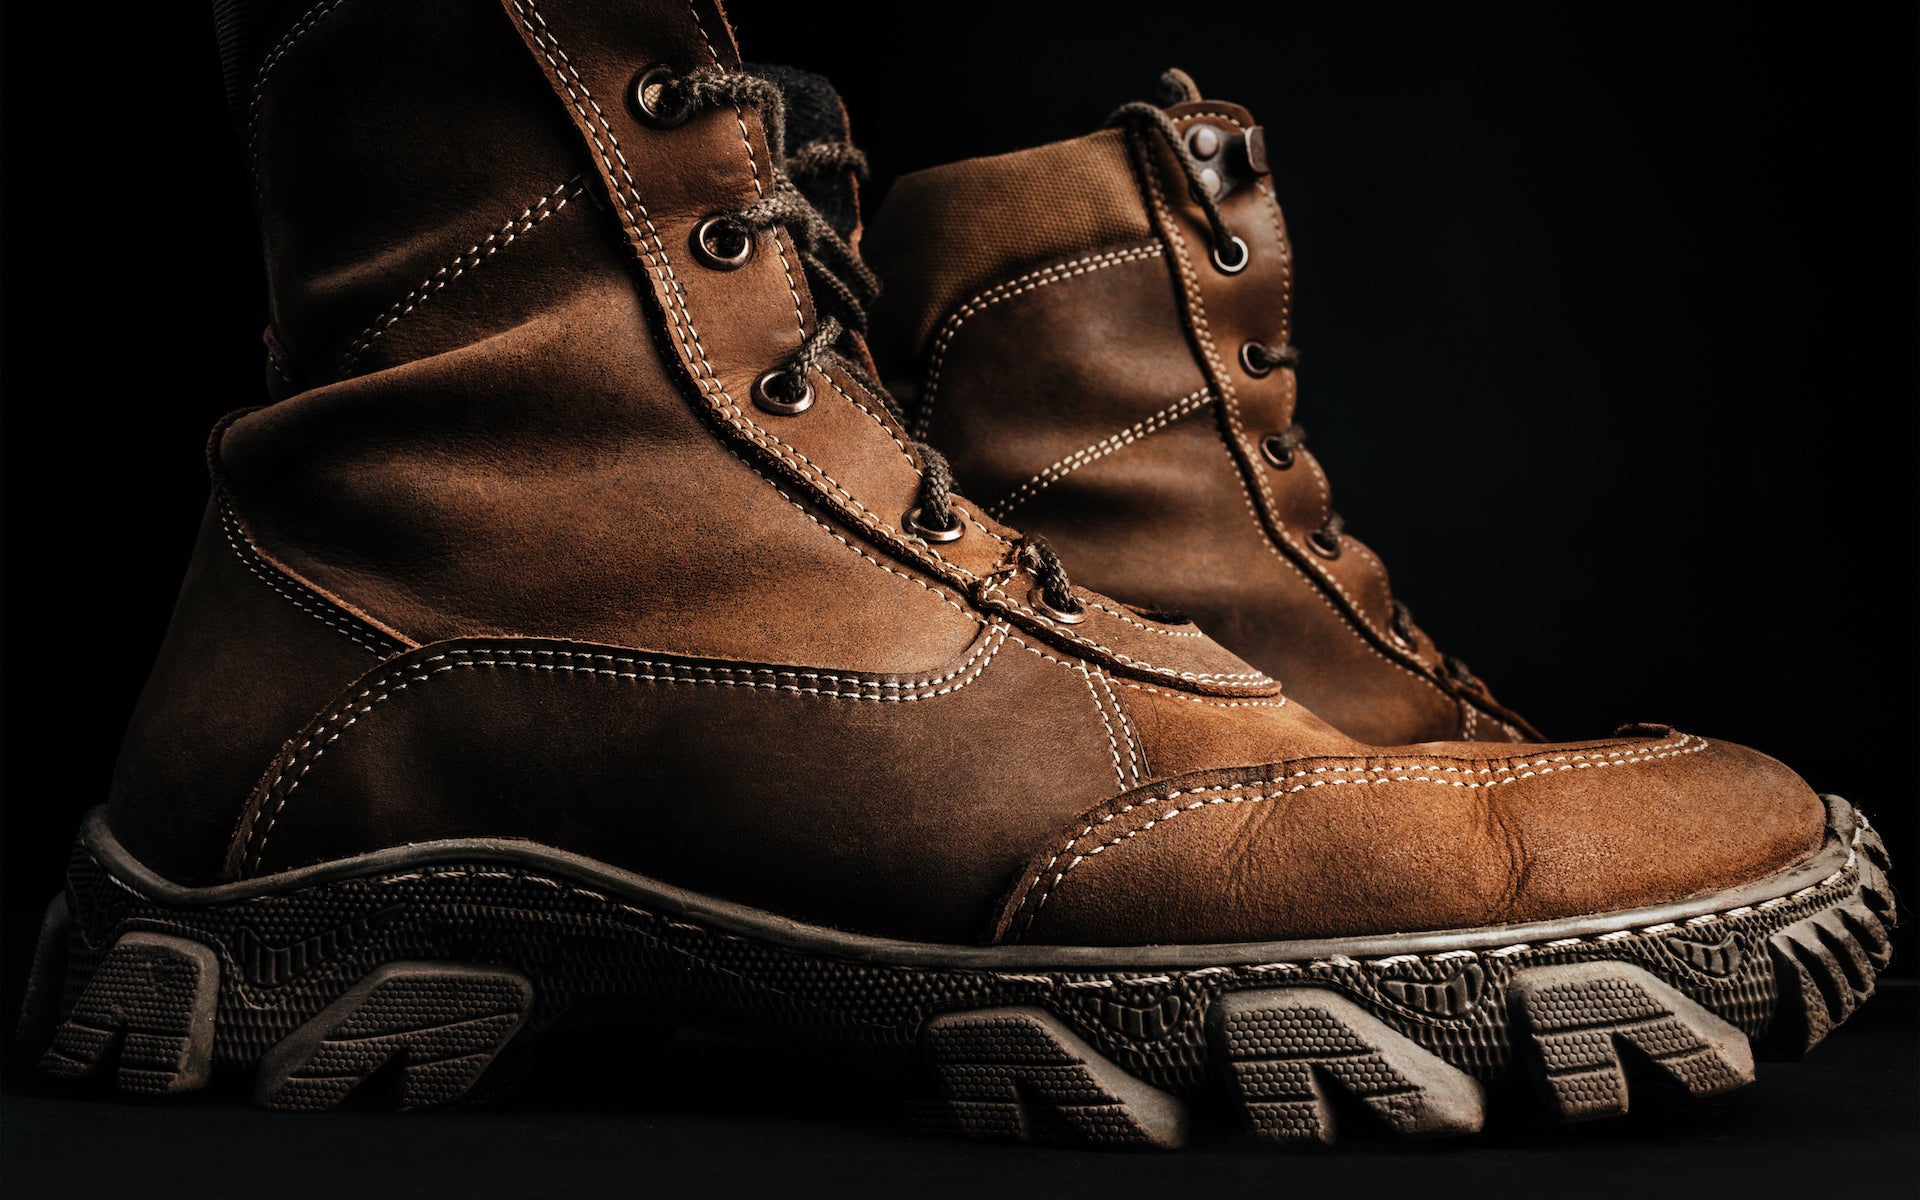 These are the best tactical boots for men.